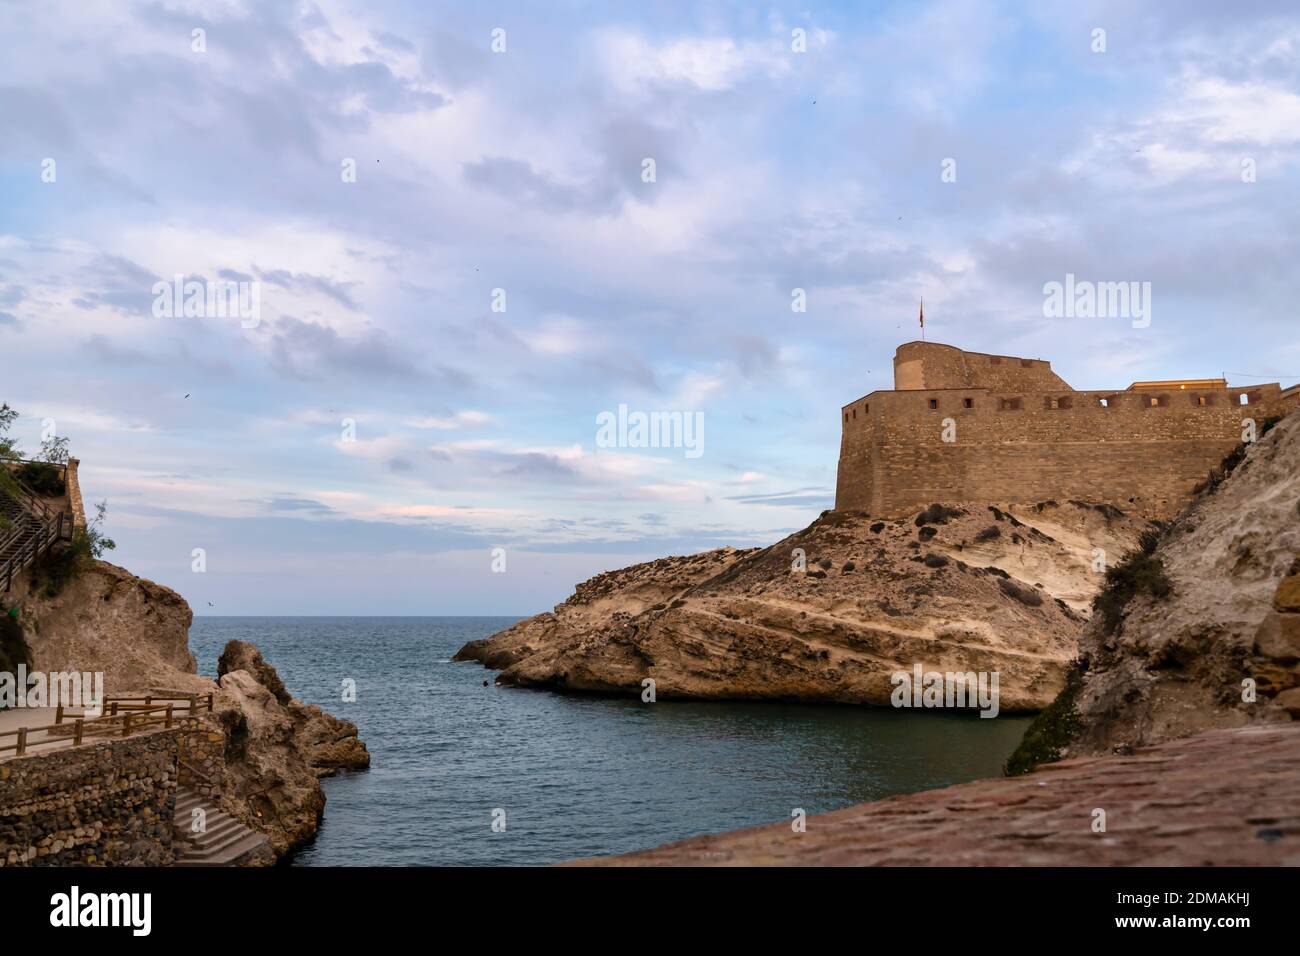 Old Melilla is a walled city, which in past centuries served as a refuge for its inhabitants in territorial disputes. Stock Photo